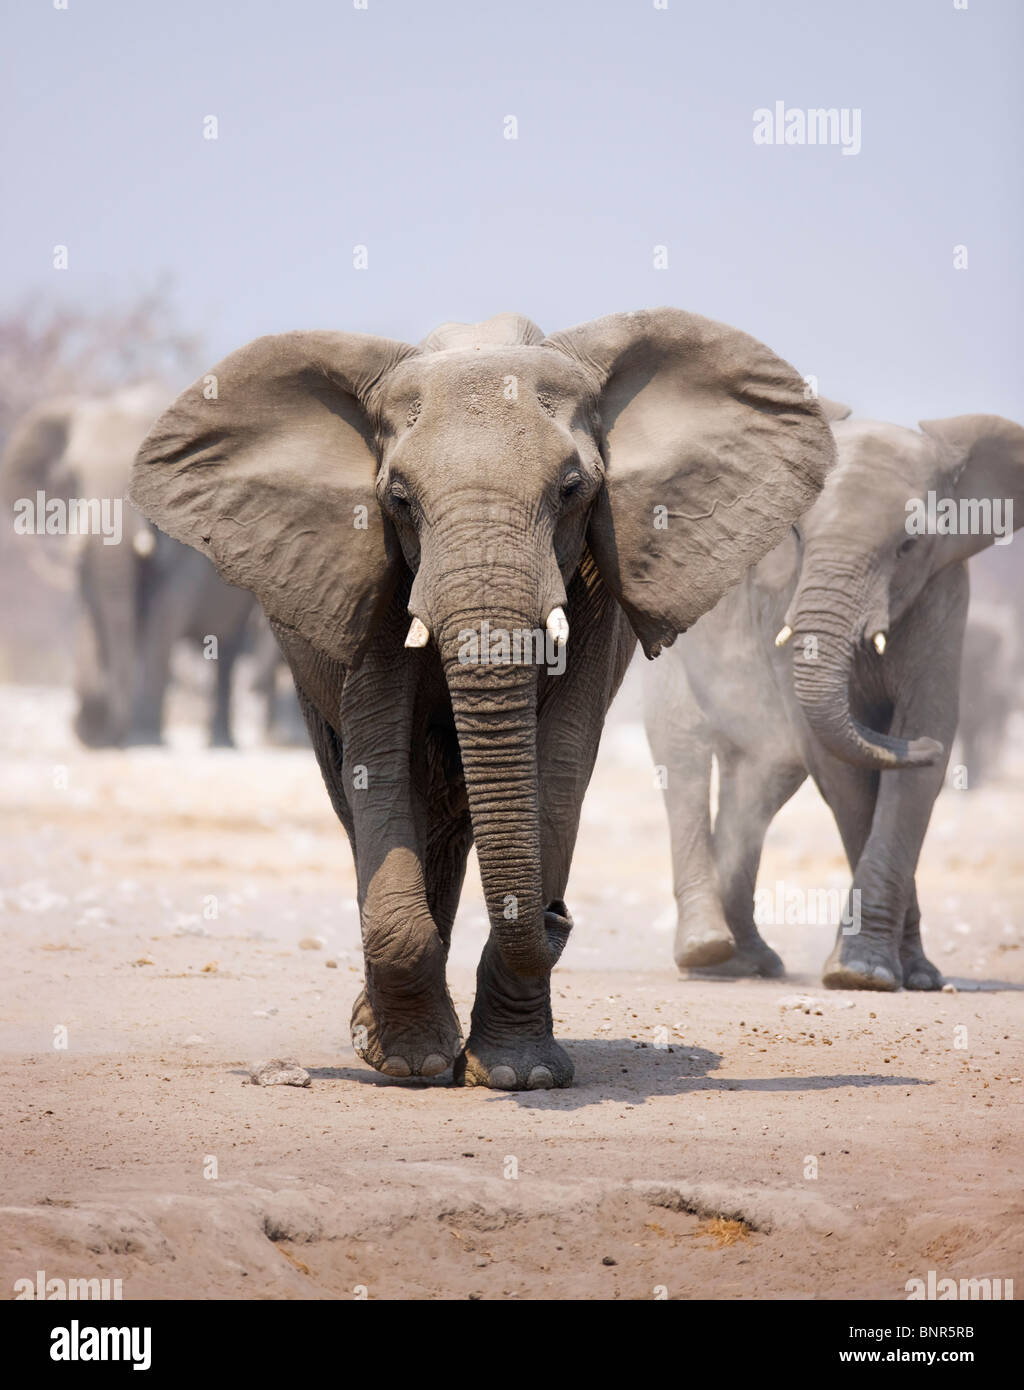 Elephant approaching over dusty sand with herd following in background (Etosha desert) Stock Photo